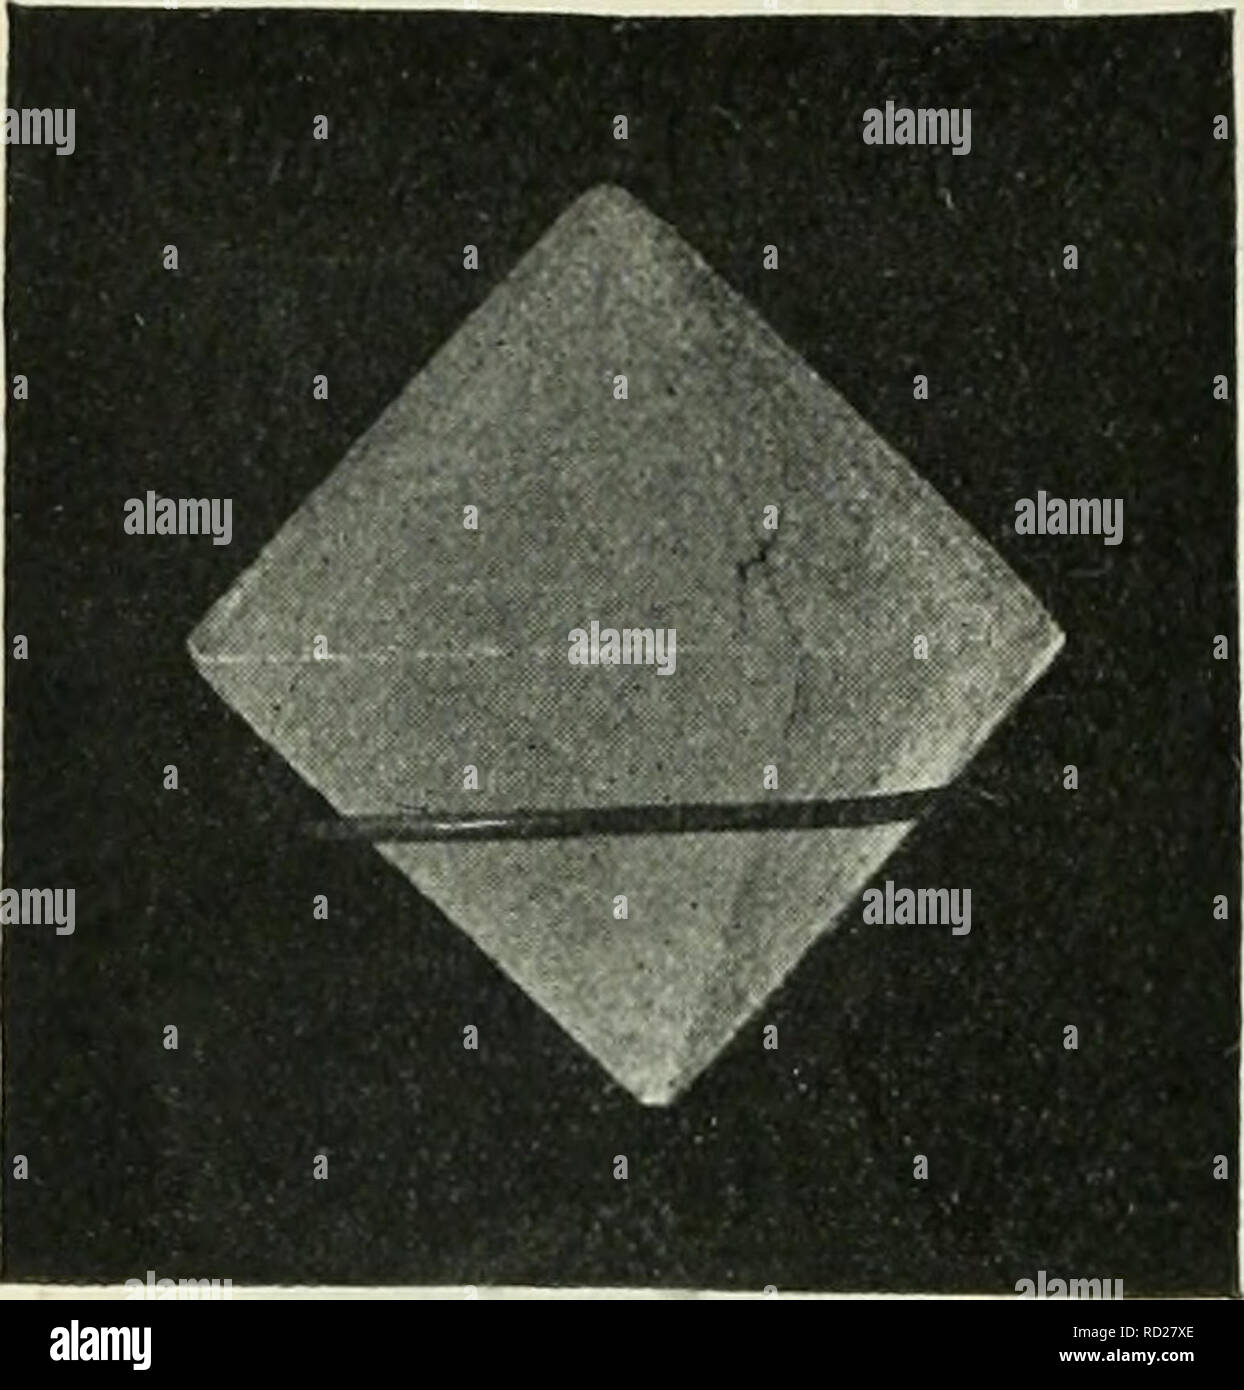 . Elementary physics and chemistry: first stage. Science. 126 ELEMENTARY PHYSICS AND CHEMISTRY,. Fig. 85.âAn eight-sided crystal of alum. (From a photograph by Mr. H. E. Hadley.) How Crystals can be made.â Warm water when saturated with any soluble substance, as you learnt in a previous lesson, often contains more of the solid dissolved than an equal quantity of a cold saturated solution. The con- sequence of this is, that if you allow a warm saturated solution to get cold, the water can no longer keep all the substance in solution, and it separates out in the solid state, which, under these c Stock Photo